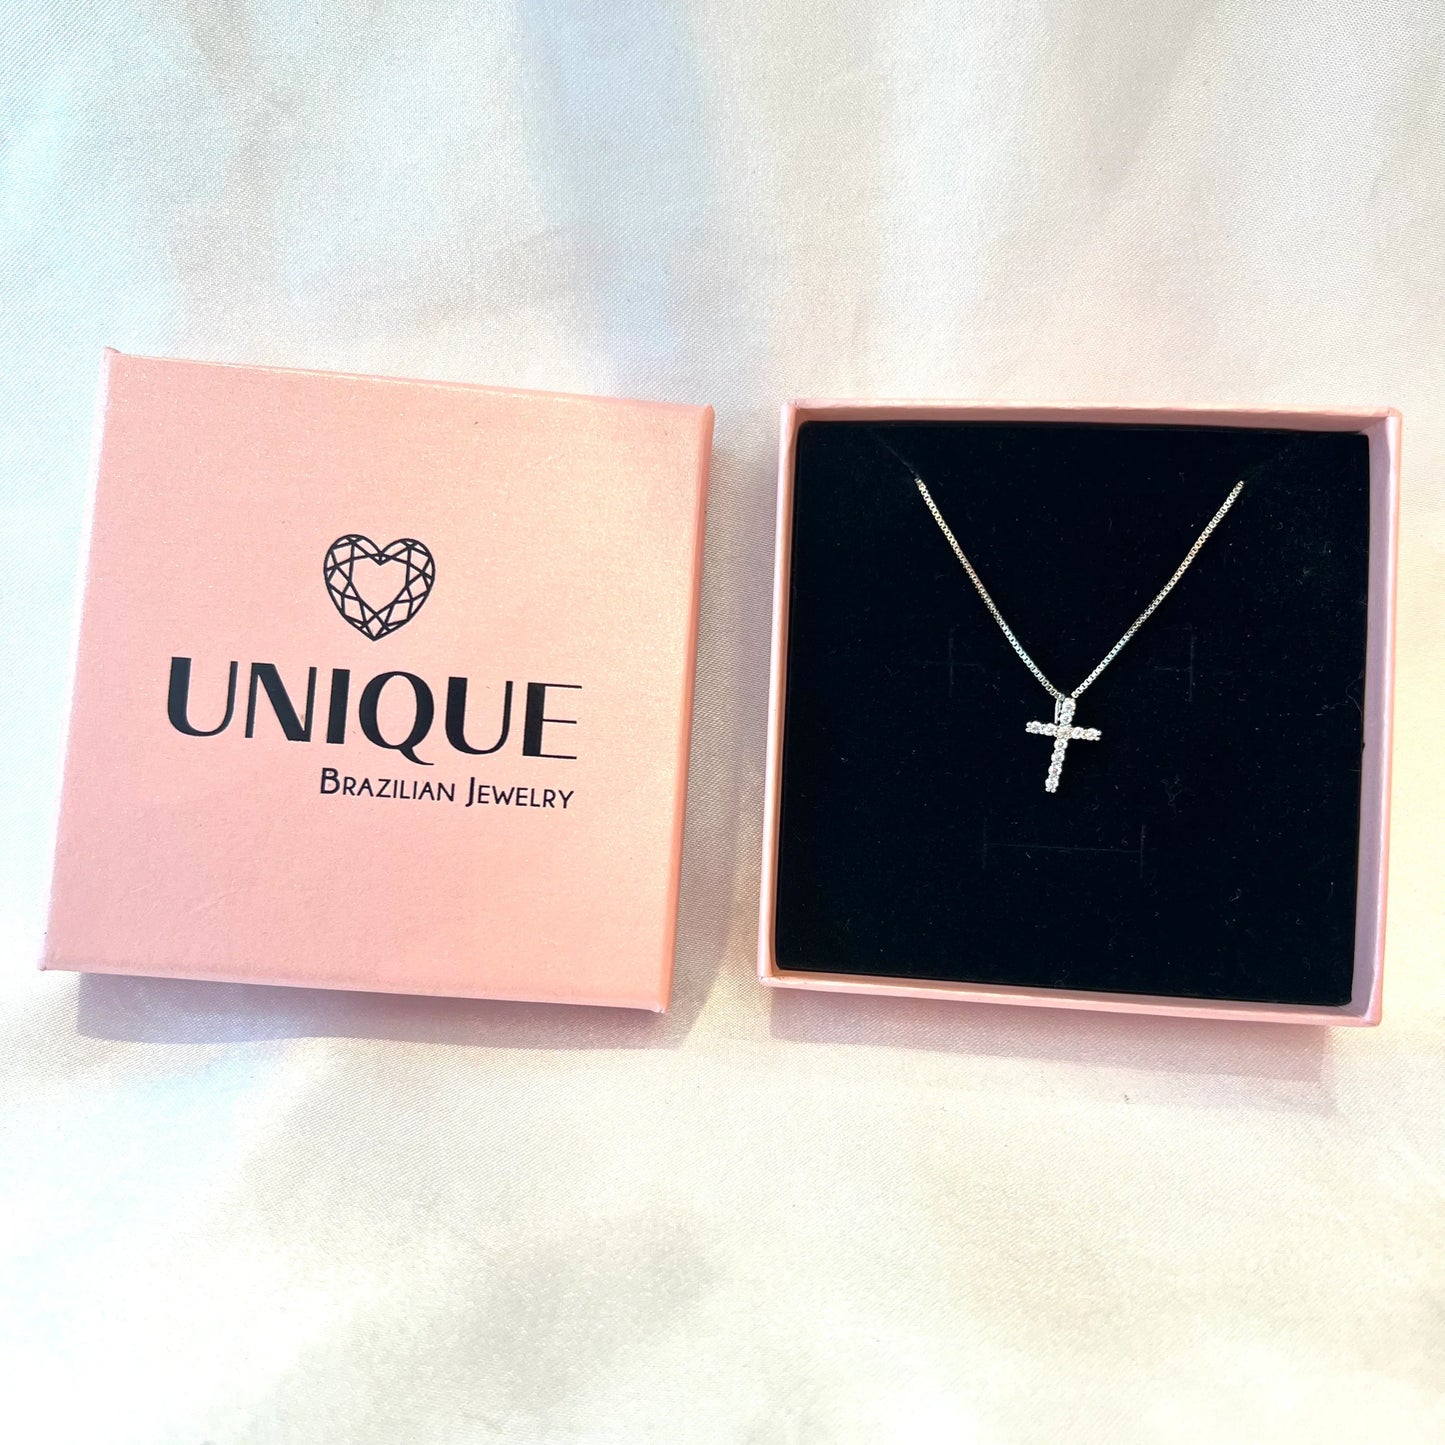 SMALL CROSS NECKLACE | Double White Rhodium Plated